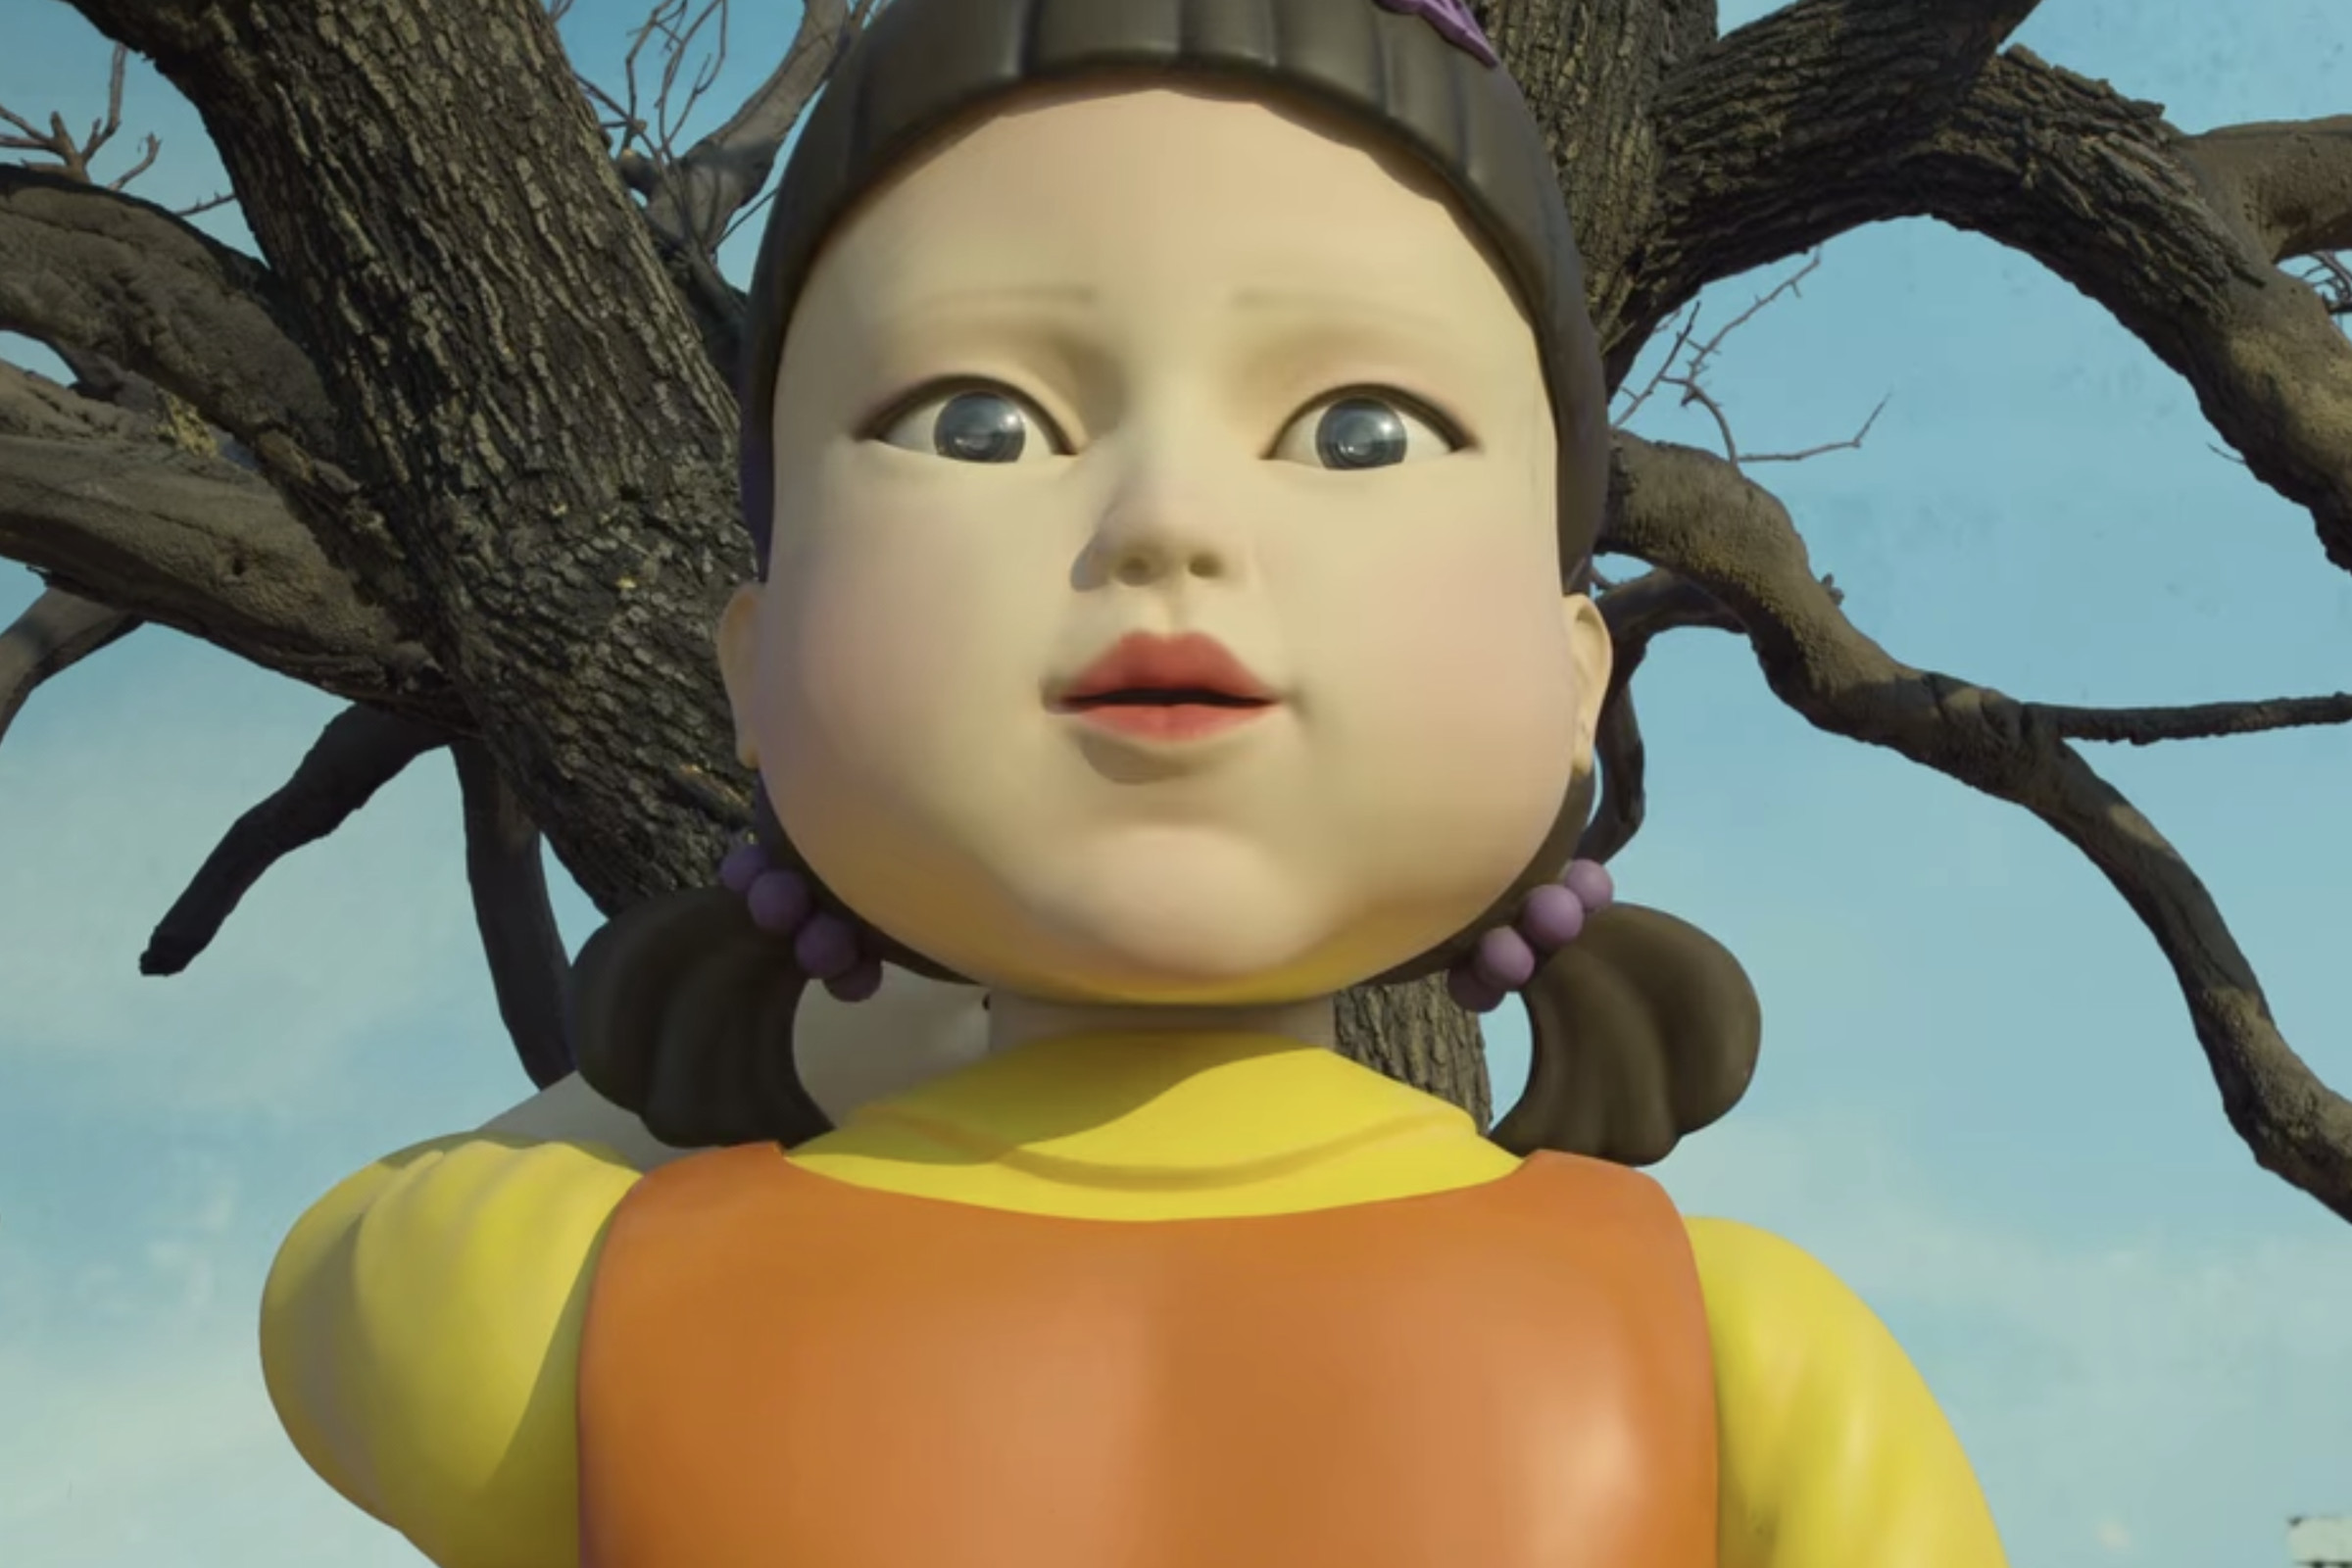 The doll used in the Netflix series Squid Game during a game of Red Light, Green Light.